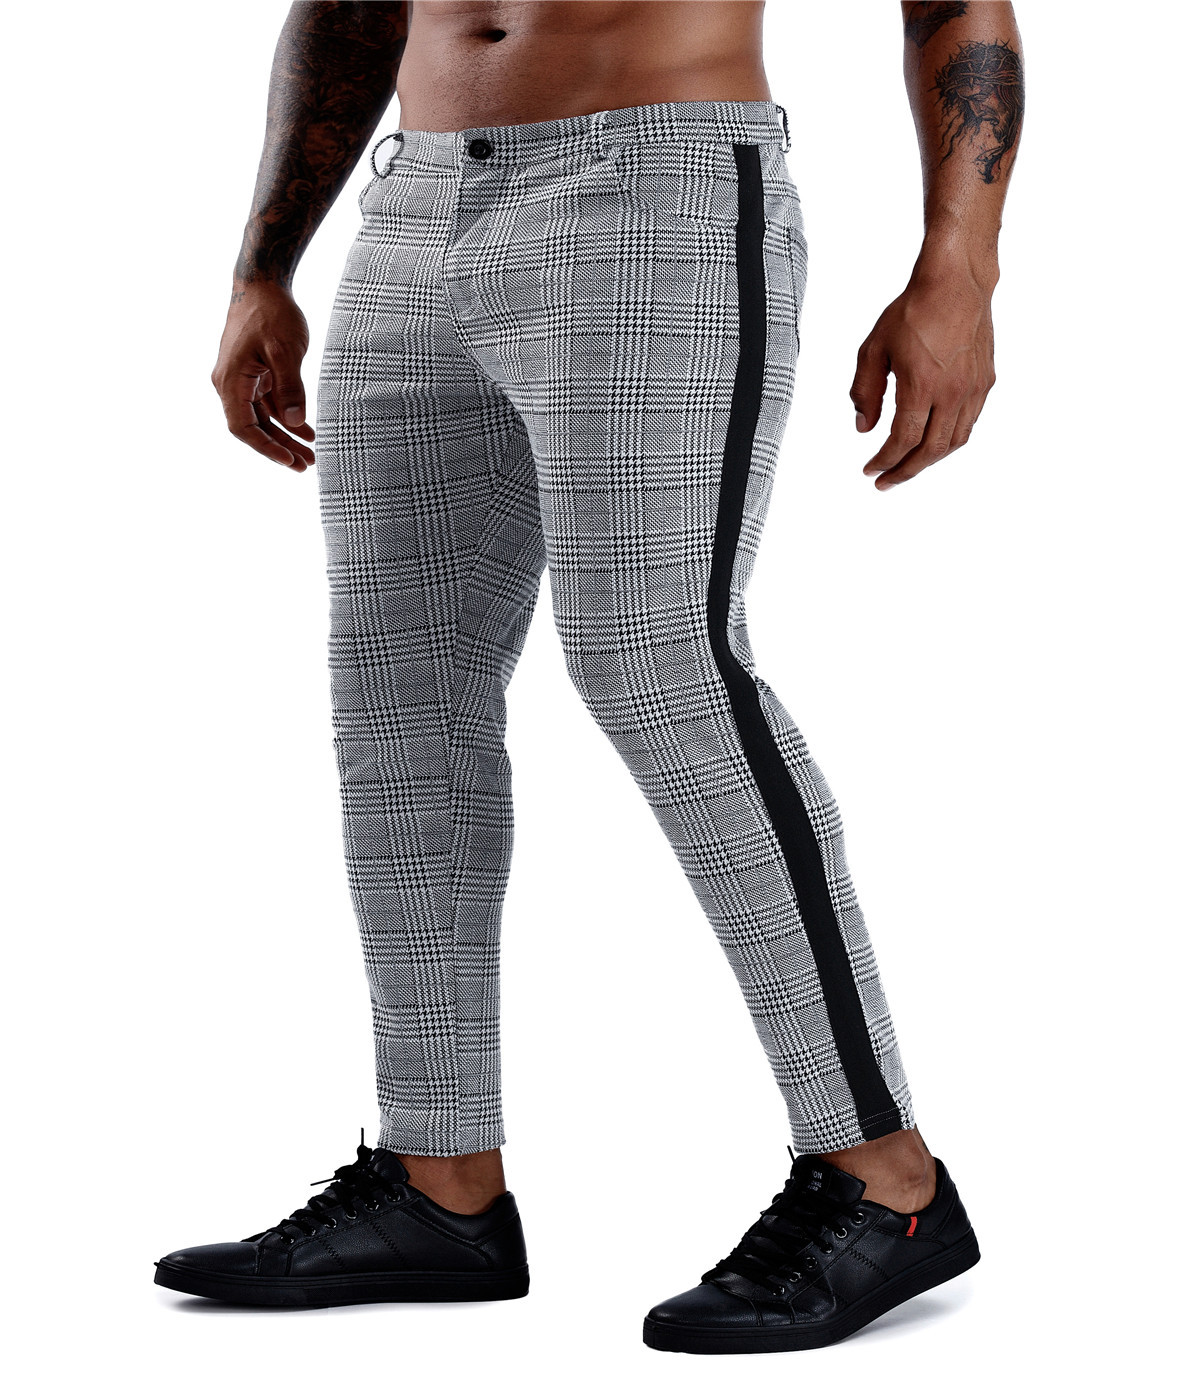 47803dbe 5a64 4477 83ab 30dbd22442be - Tapered leg men's checkered trousers